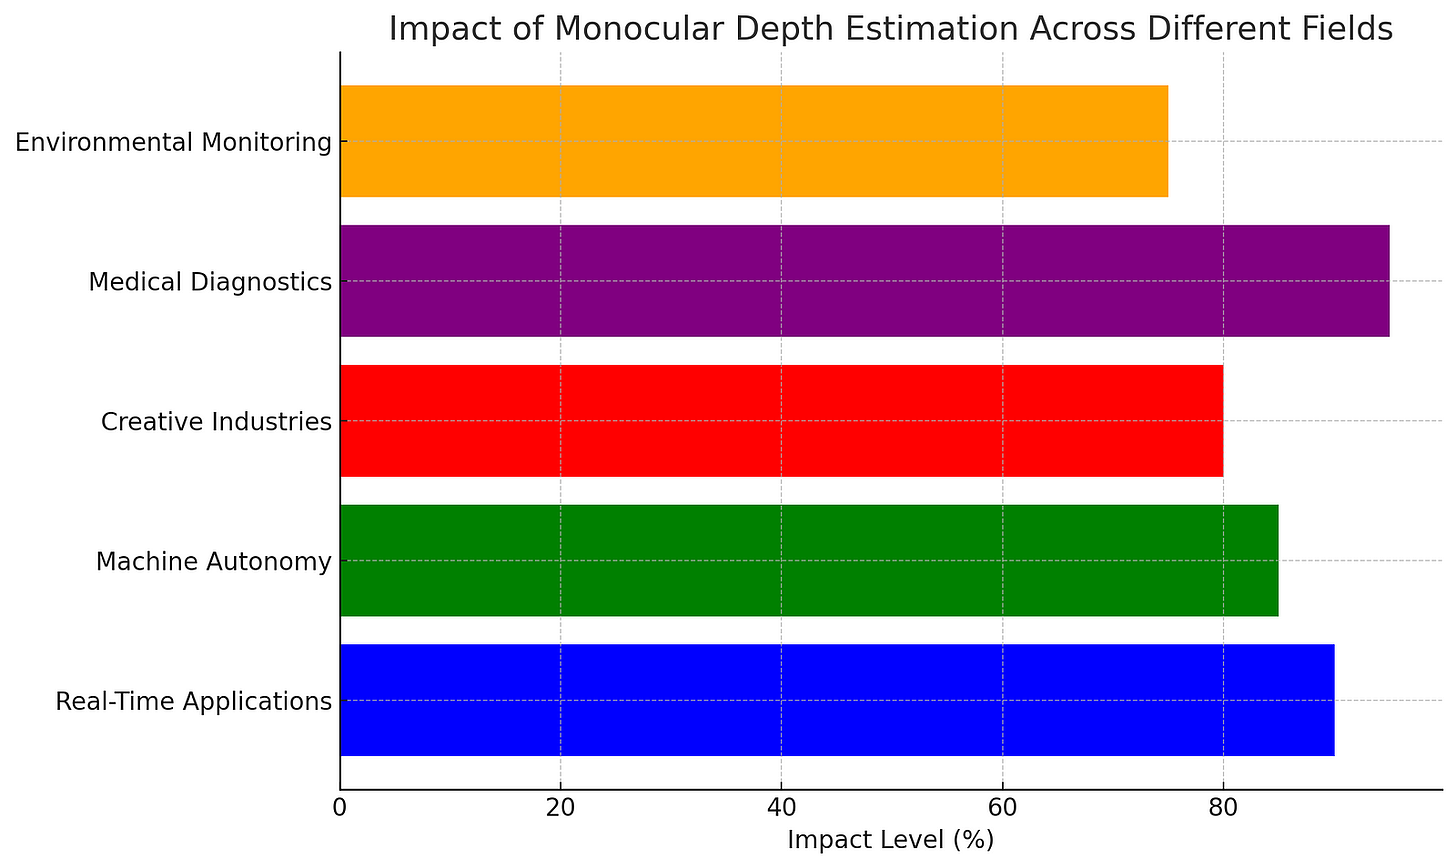 Horizontal bar graph displaying the impact levels of monocular depth estimation across five fields: Real-Time Applications, Machine Autonomy, Creative Industries, Medical Diagnostics, and Environmental Monitoring, with impact levels ranging from 75% to 95%.